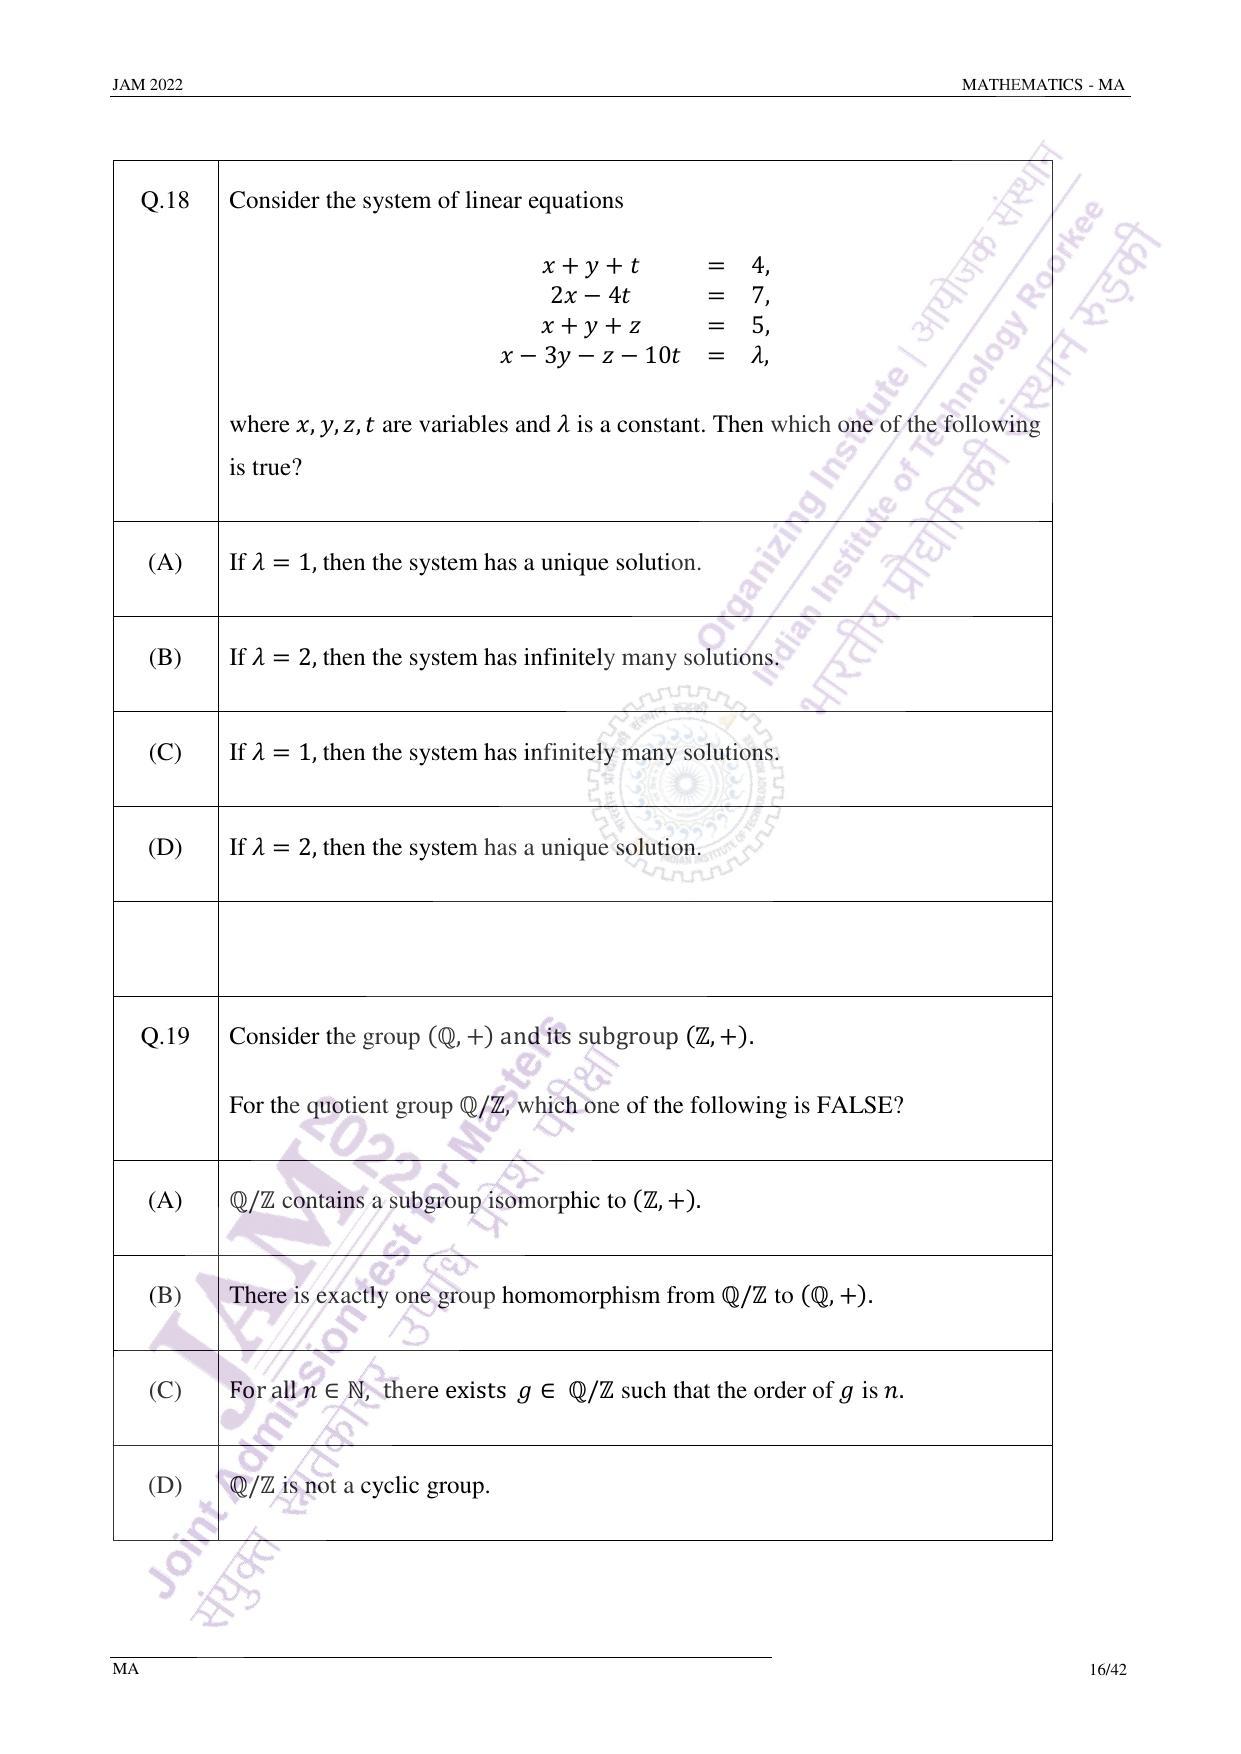 JAM 2022: MA Question Paper - Page 16